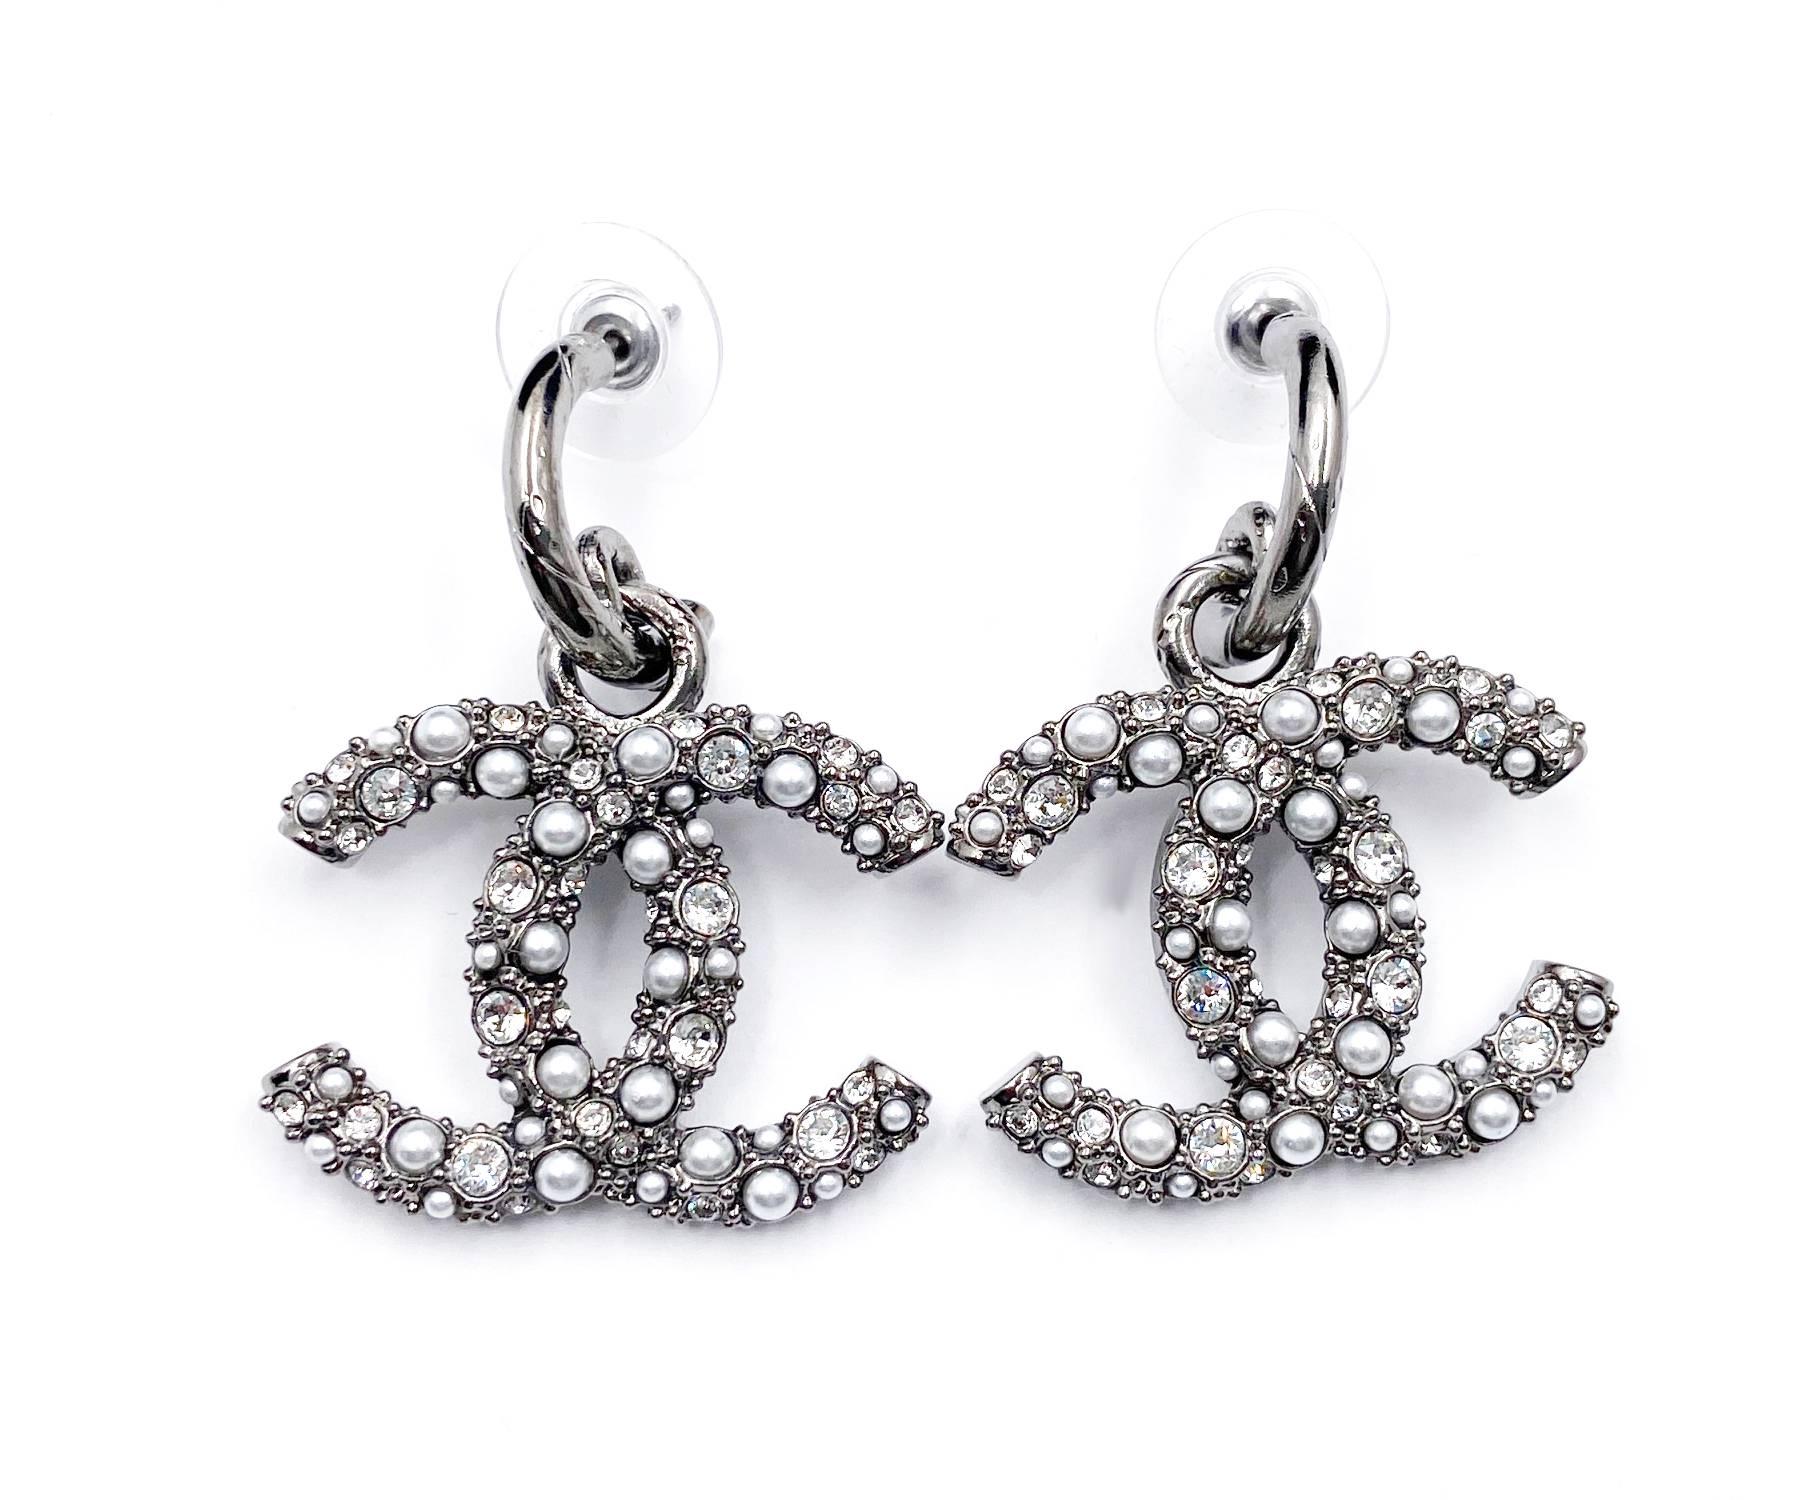 Chanel Brand New Grey CC Crystal Pearl XL Piercing Earrings

*Marked 20
*Made in France
*Comes with original box, pouch, booklet, ribbon and camellia
*Brand new

-Approximately 1.6″ x 1.5″
-Very gorgeous piece

10104-8240